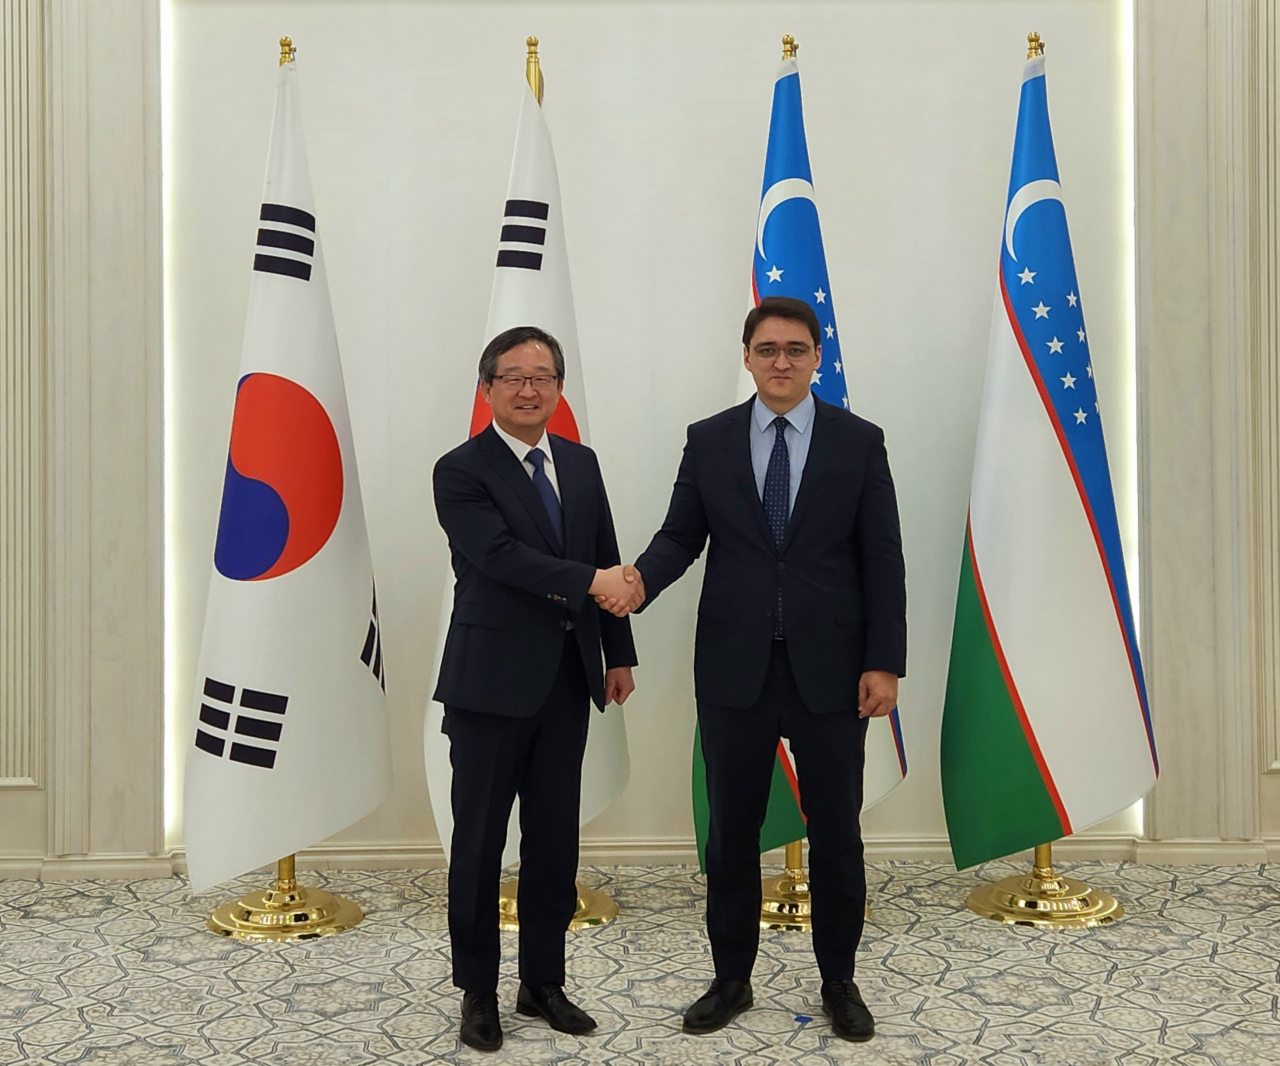 South Korean Deputy Minister for Political Affairs Chung Byung-won (left) and Uzbek Deputy Foreign Minister Bobur Usmanov shake hands during the 16th Korea-Uzbekistan Policy Consultation held on Monday in Tashkent. (South Korean Ministry of Foreign Affairs)